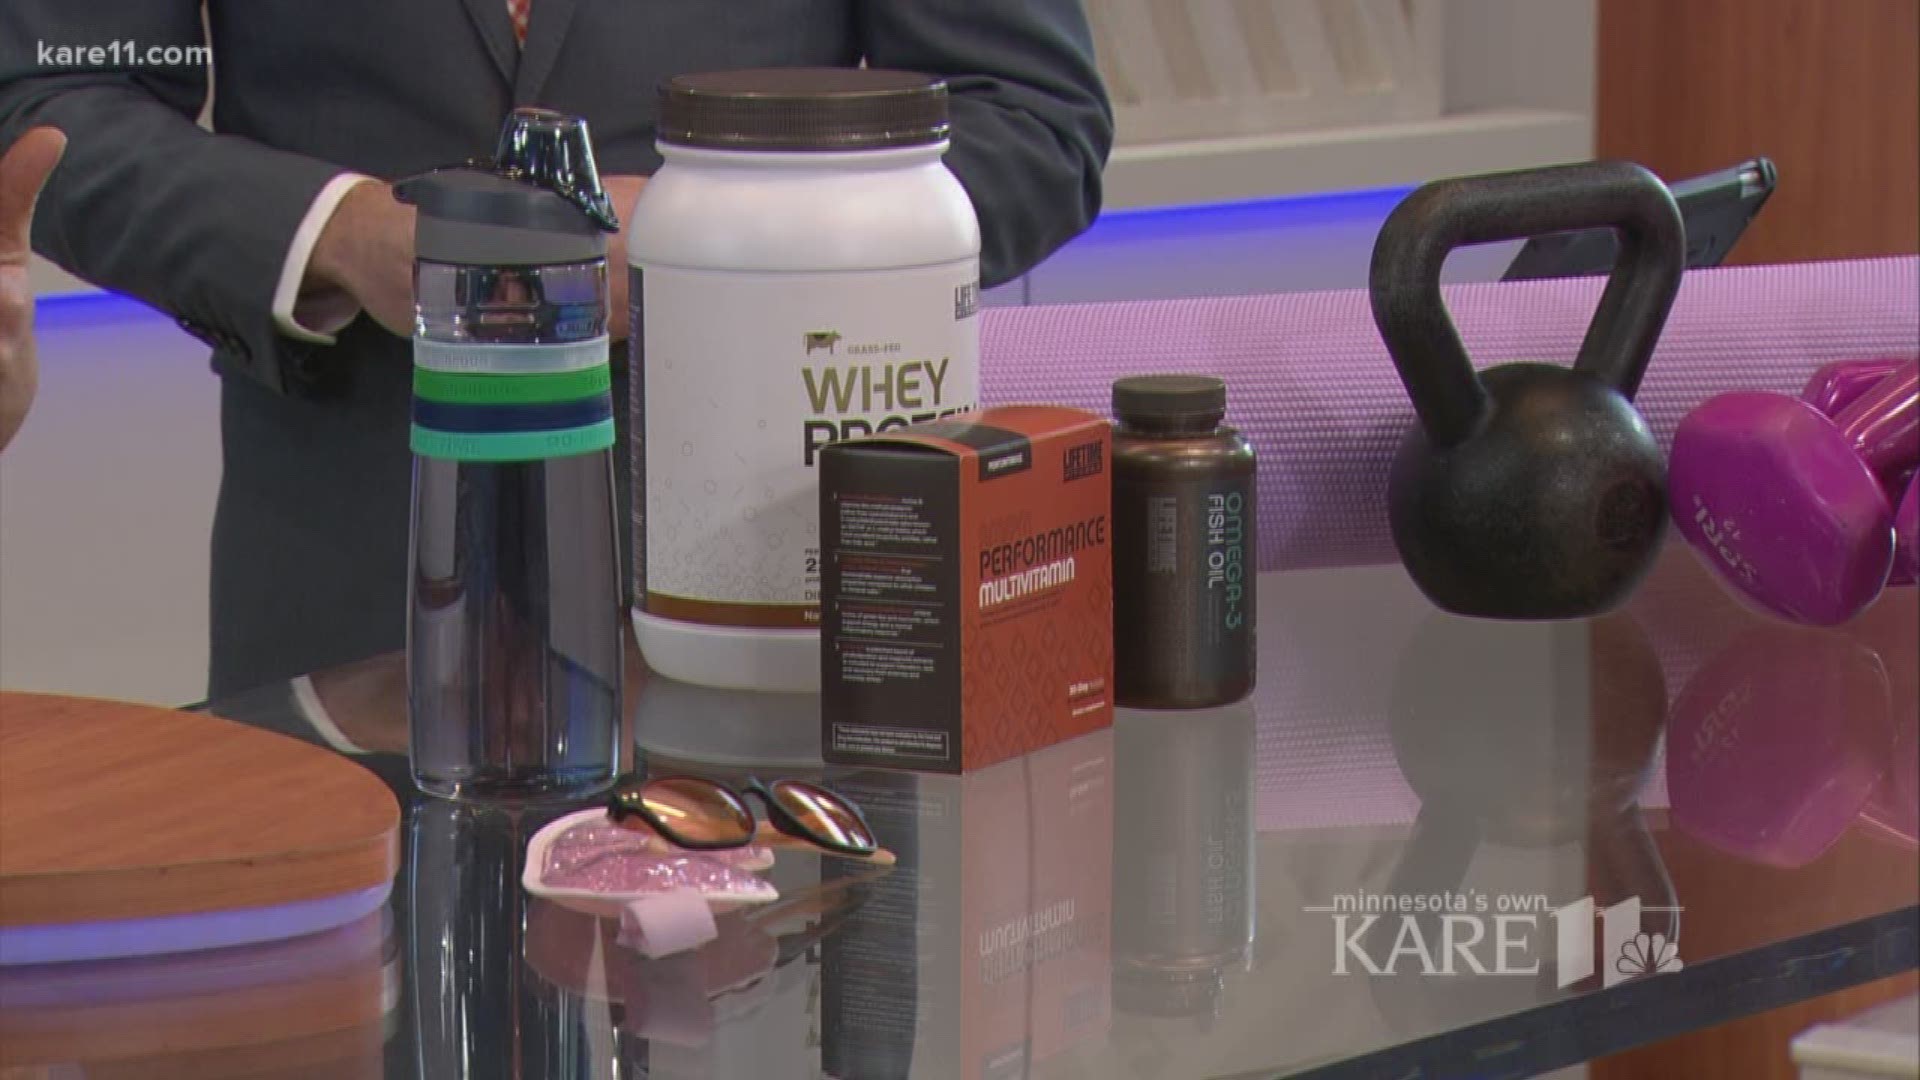 With holiday festivities starting up in full force, it can be easy to feel stressed and let healthy lifestyle habits slip away during this time of year. Life Time personal trainer and nutrition program coordinator Keri Anderson appeared on KARE 11 to sha